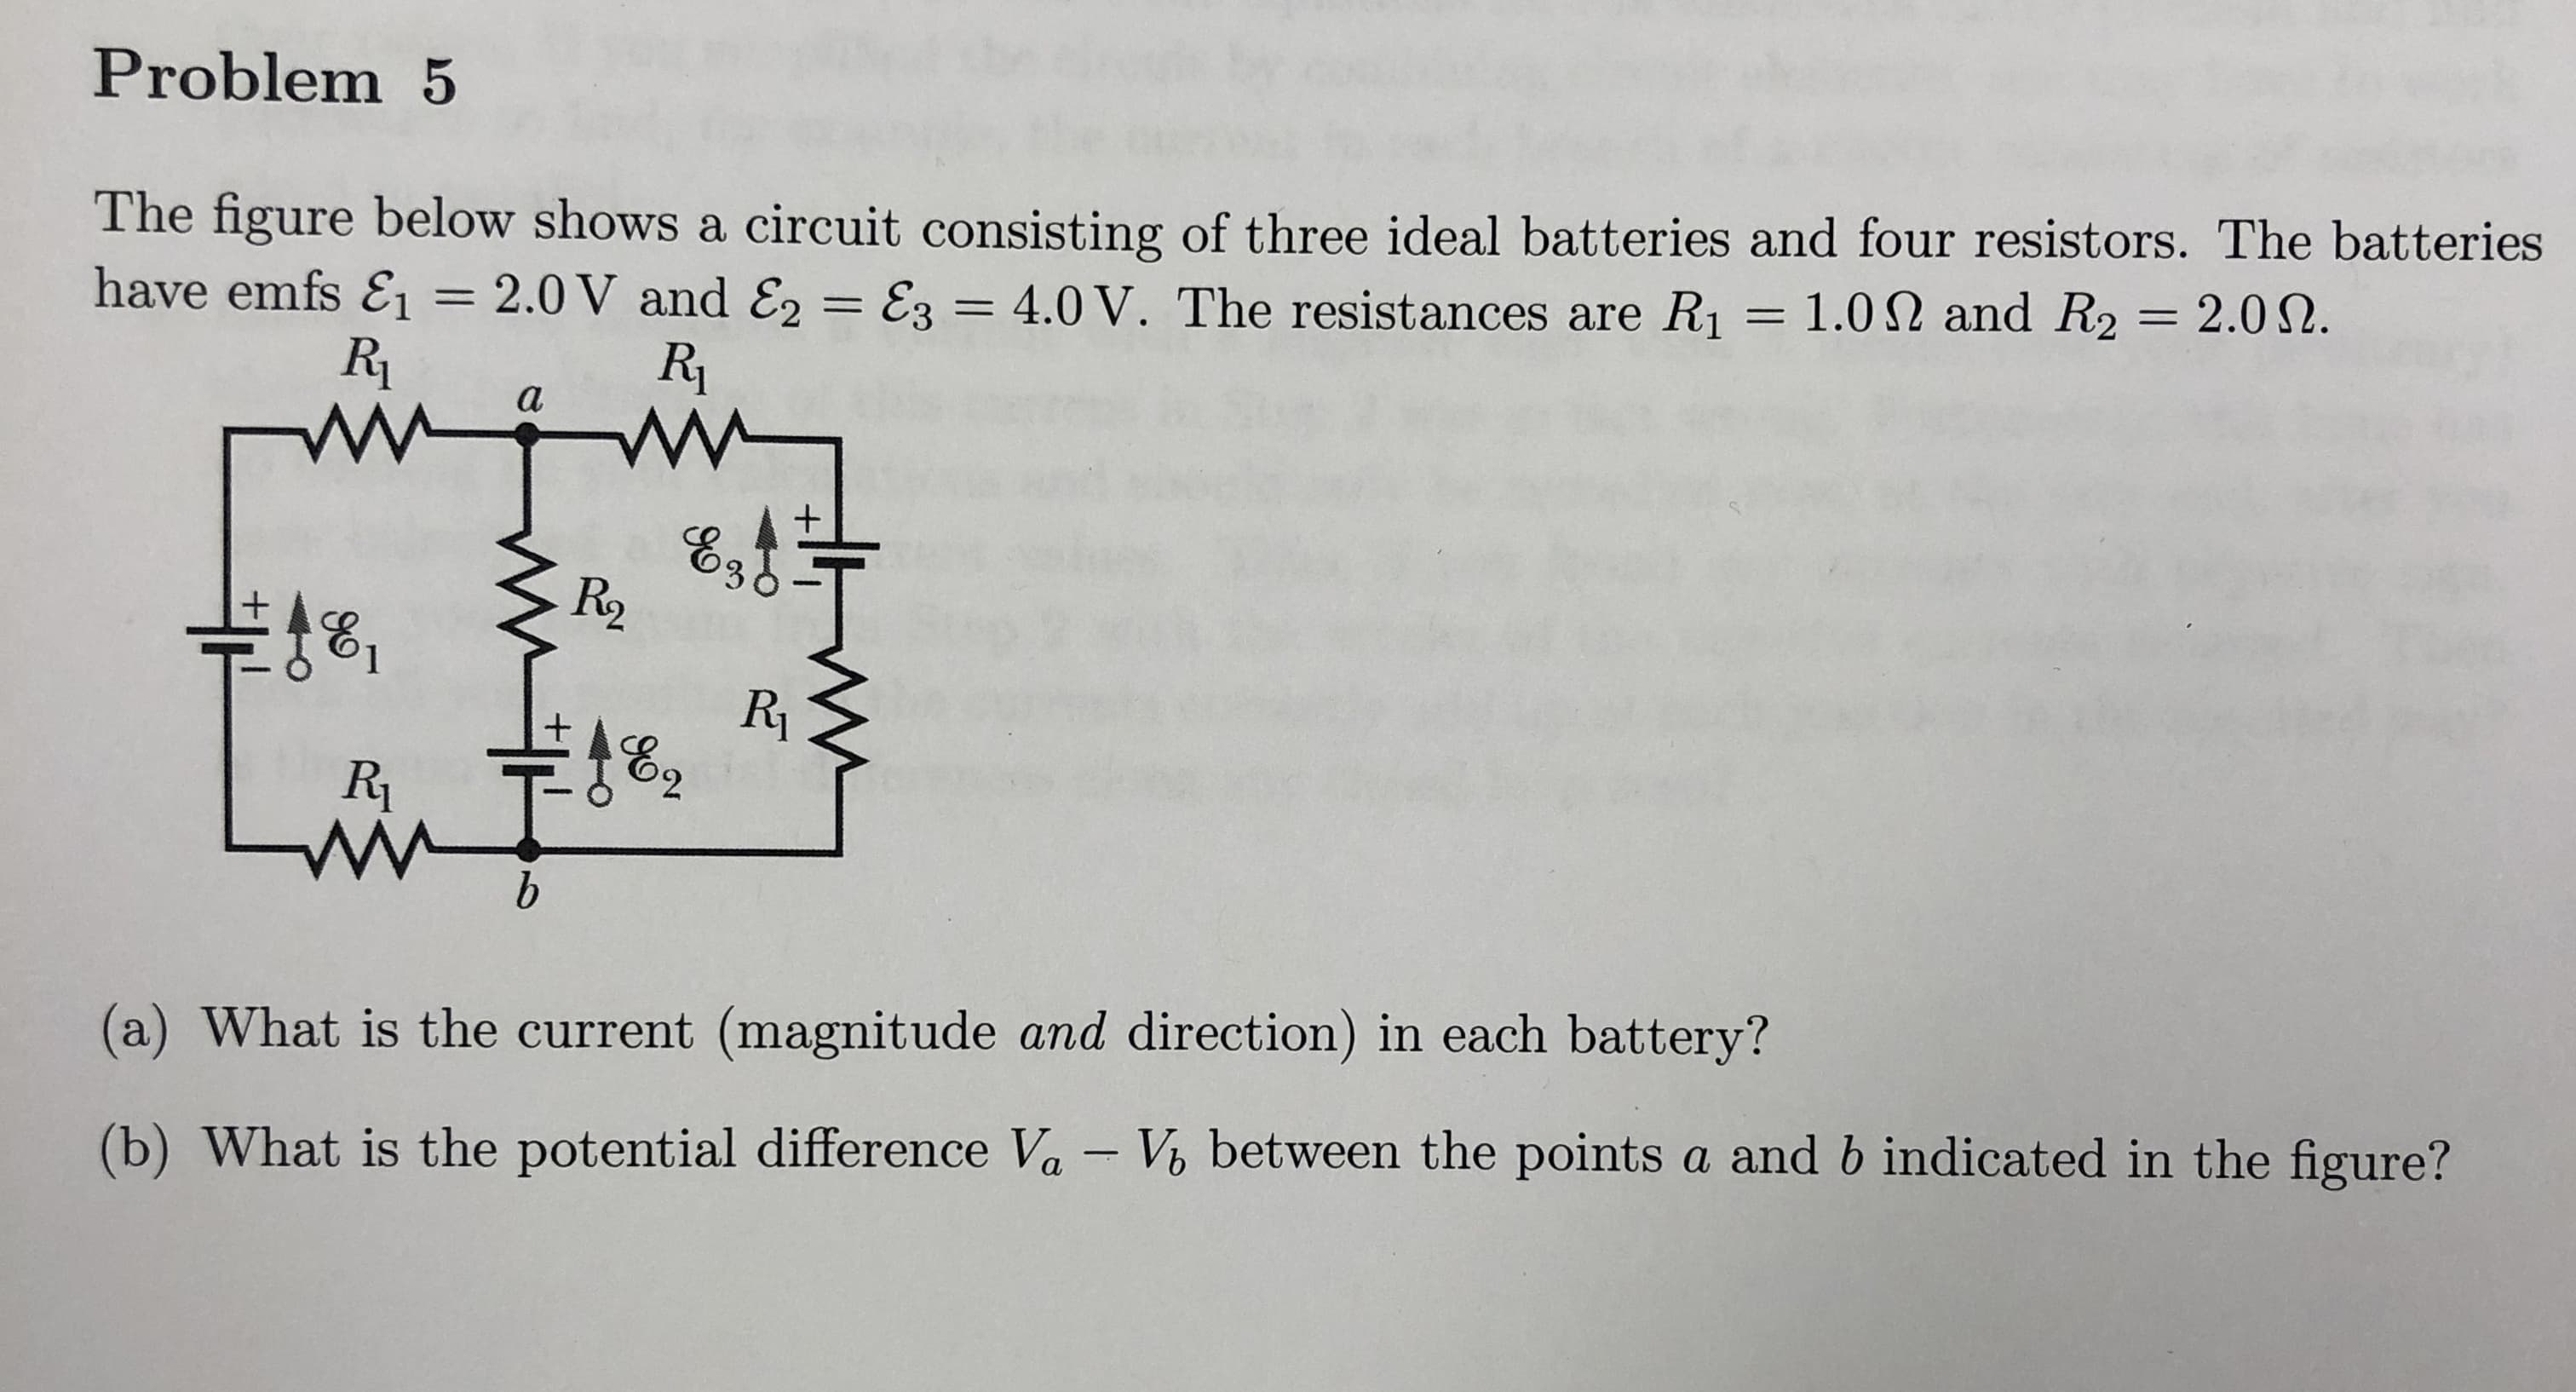 Problem 5
The figure below shows a circuit consisting of three ideal batteries and four resistors. The batteries
have emfs E! = 2.0V and E,-E, 4.0 V. The resistances are R1 = 1.0 Ω and R2 = 2.0 Ω.
Ri
R2
(a) What is the current (magnitude and direction) in each battery?
(b) What is the potential difference Va V, between the points a and b indicated in the figure?
